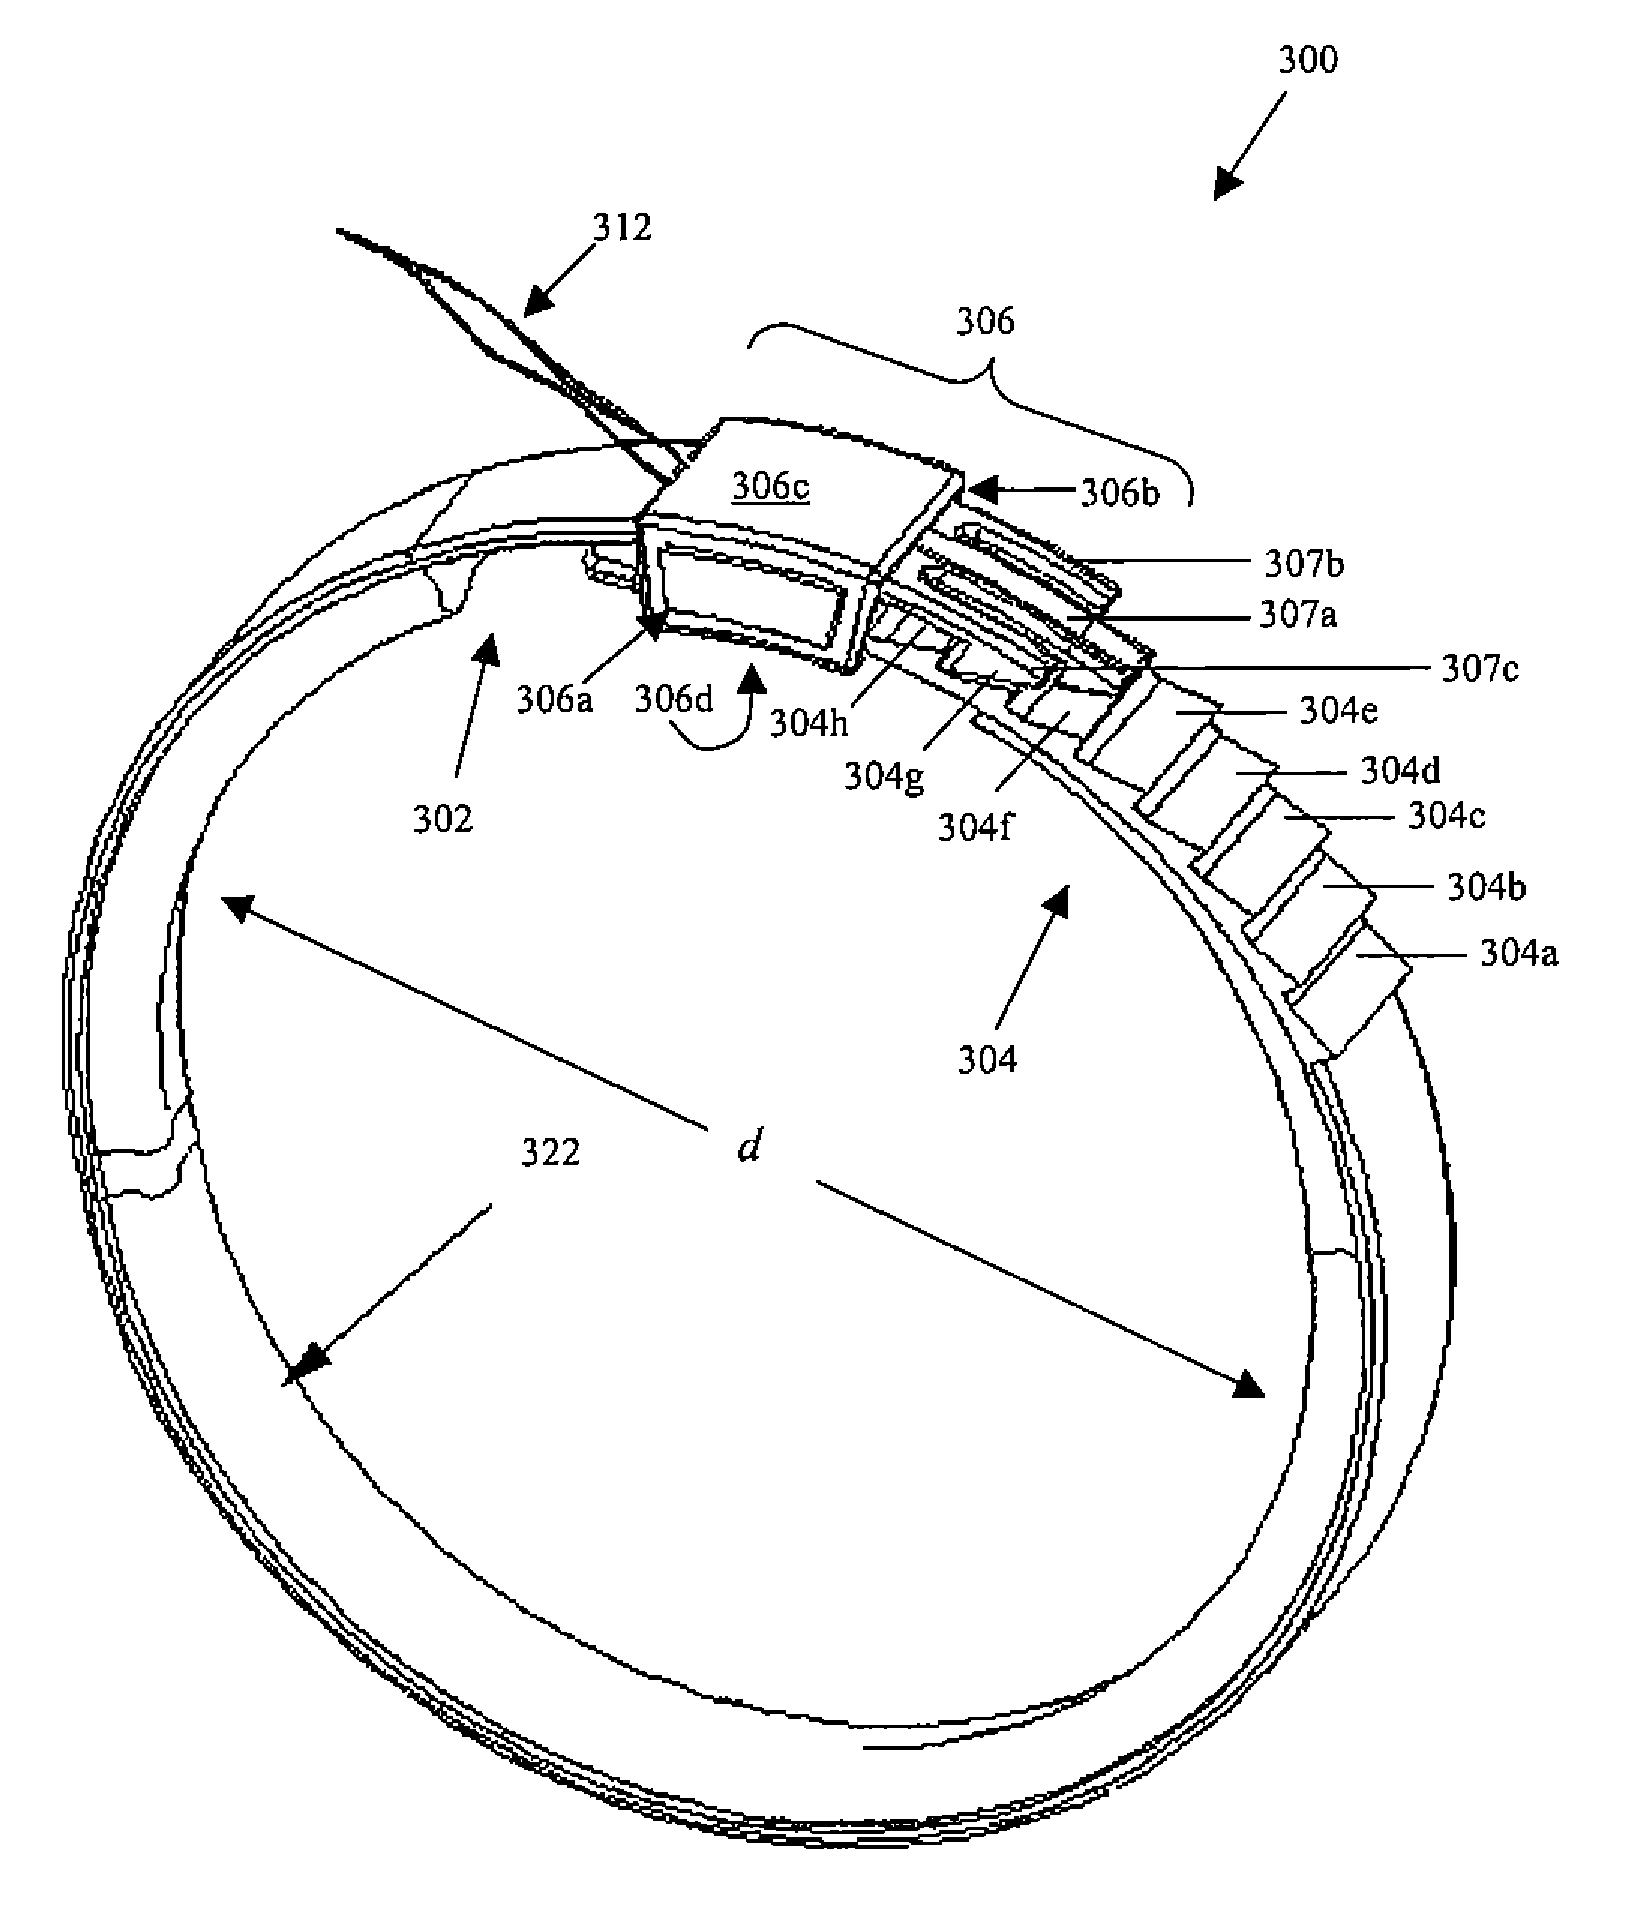 Electroactive polymer actuated gastric band